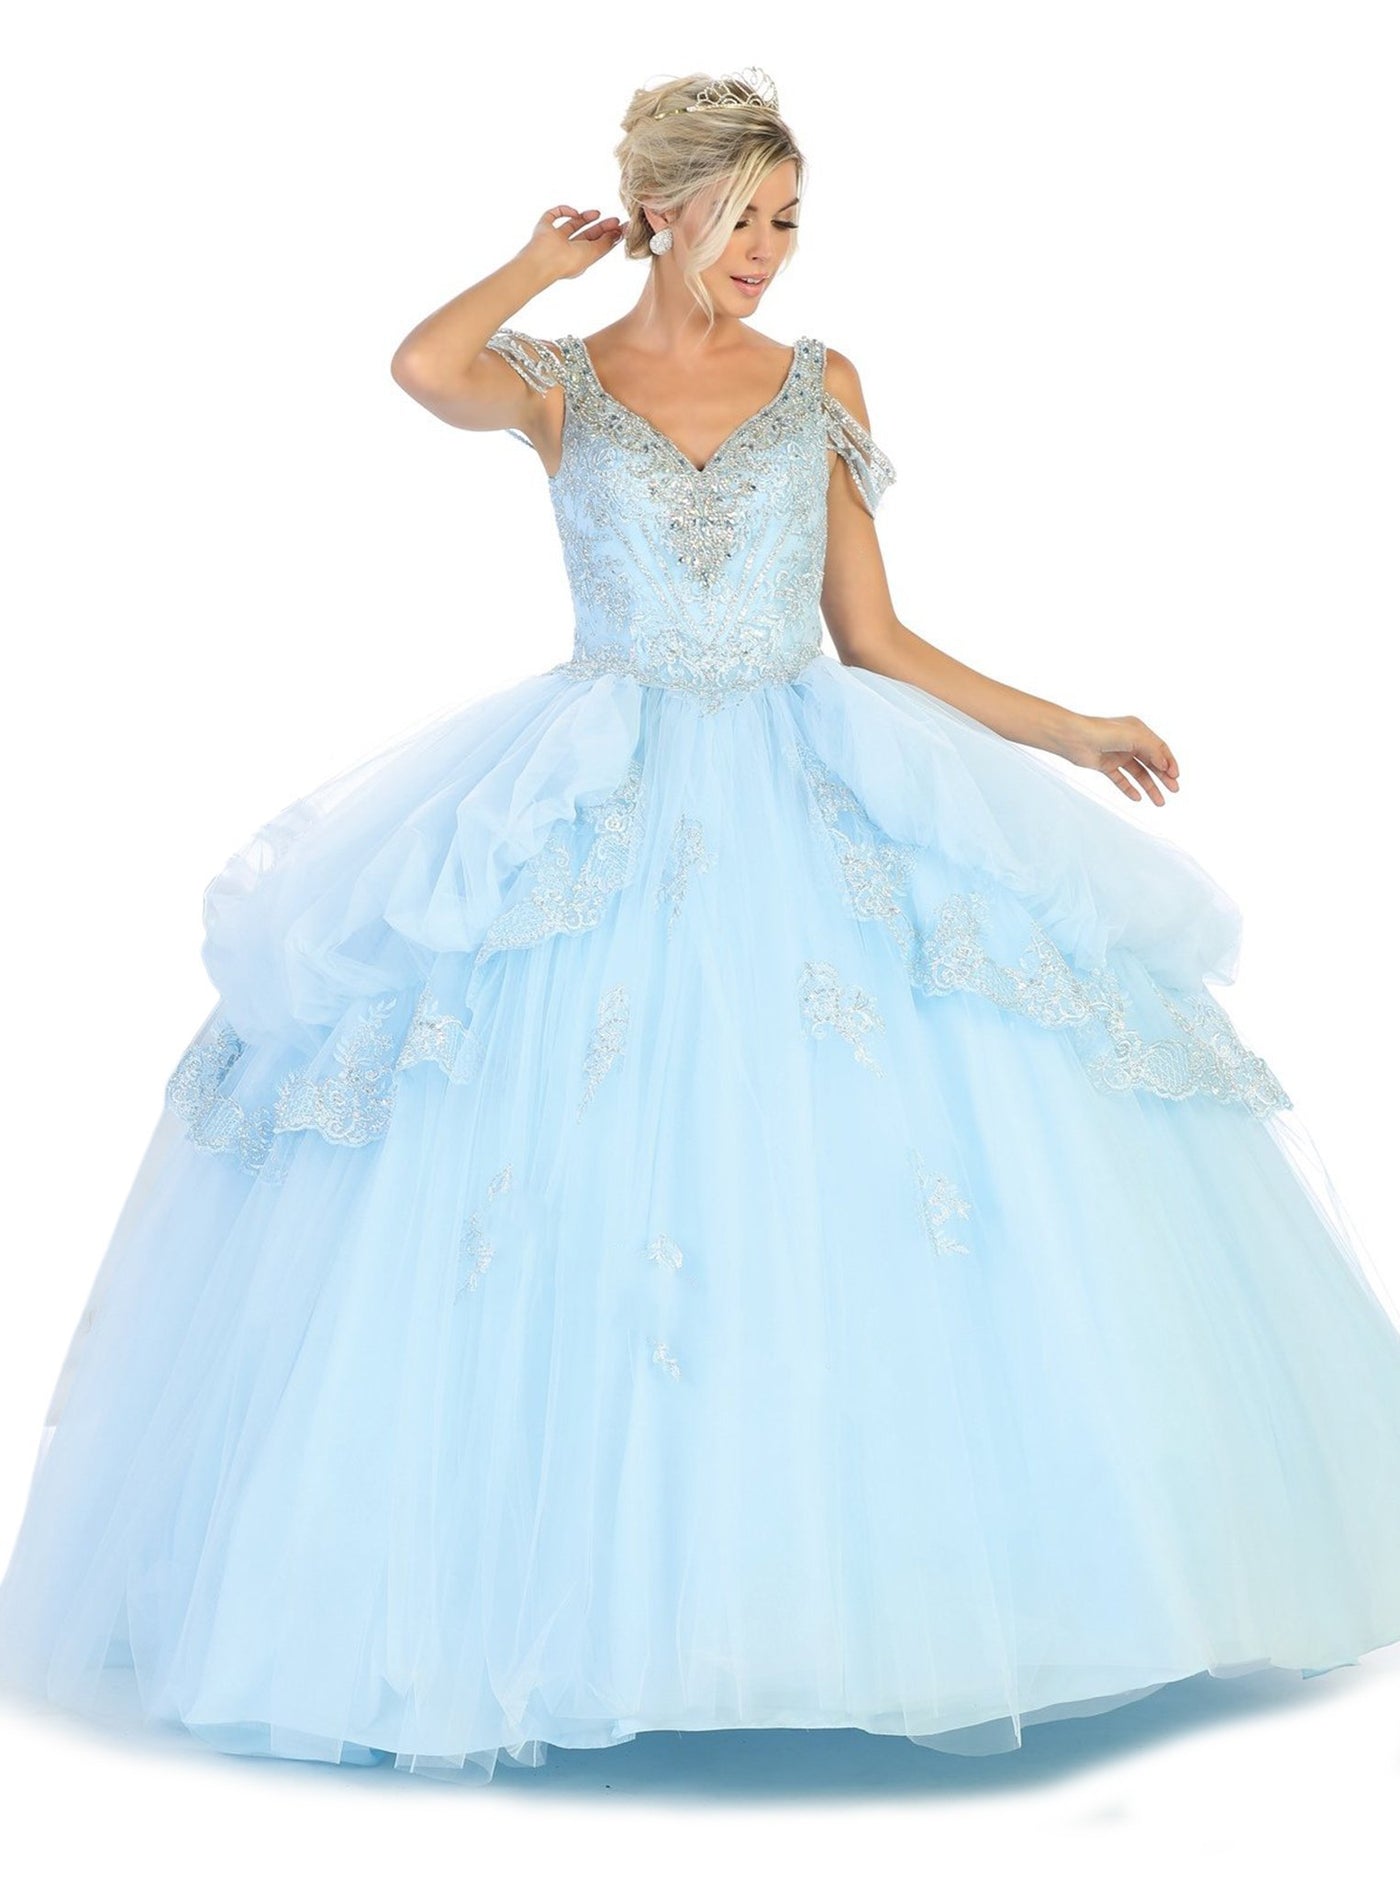 May Queen - LK116 Jeweled Lace Bodice Ruffled Ballgown In Blue